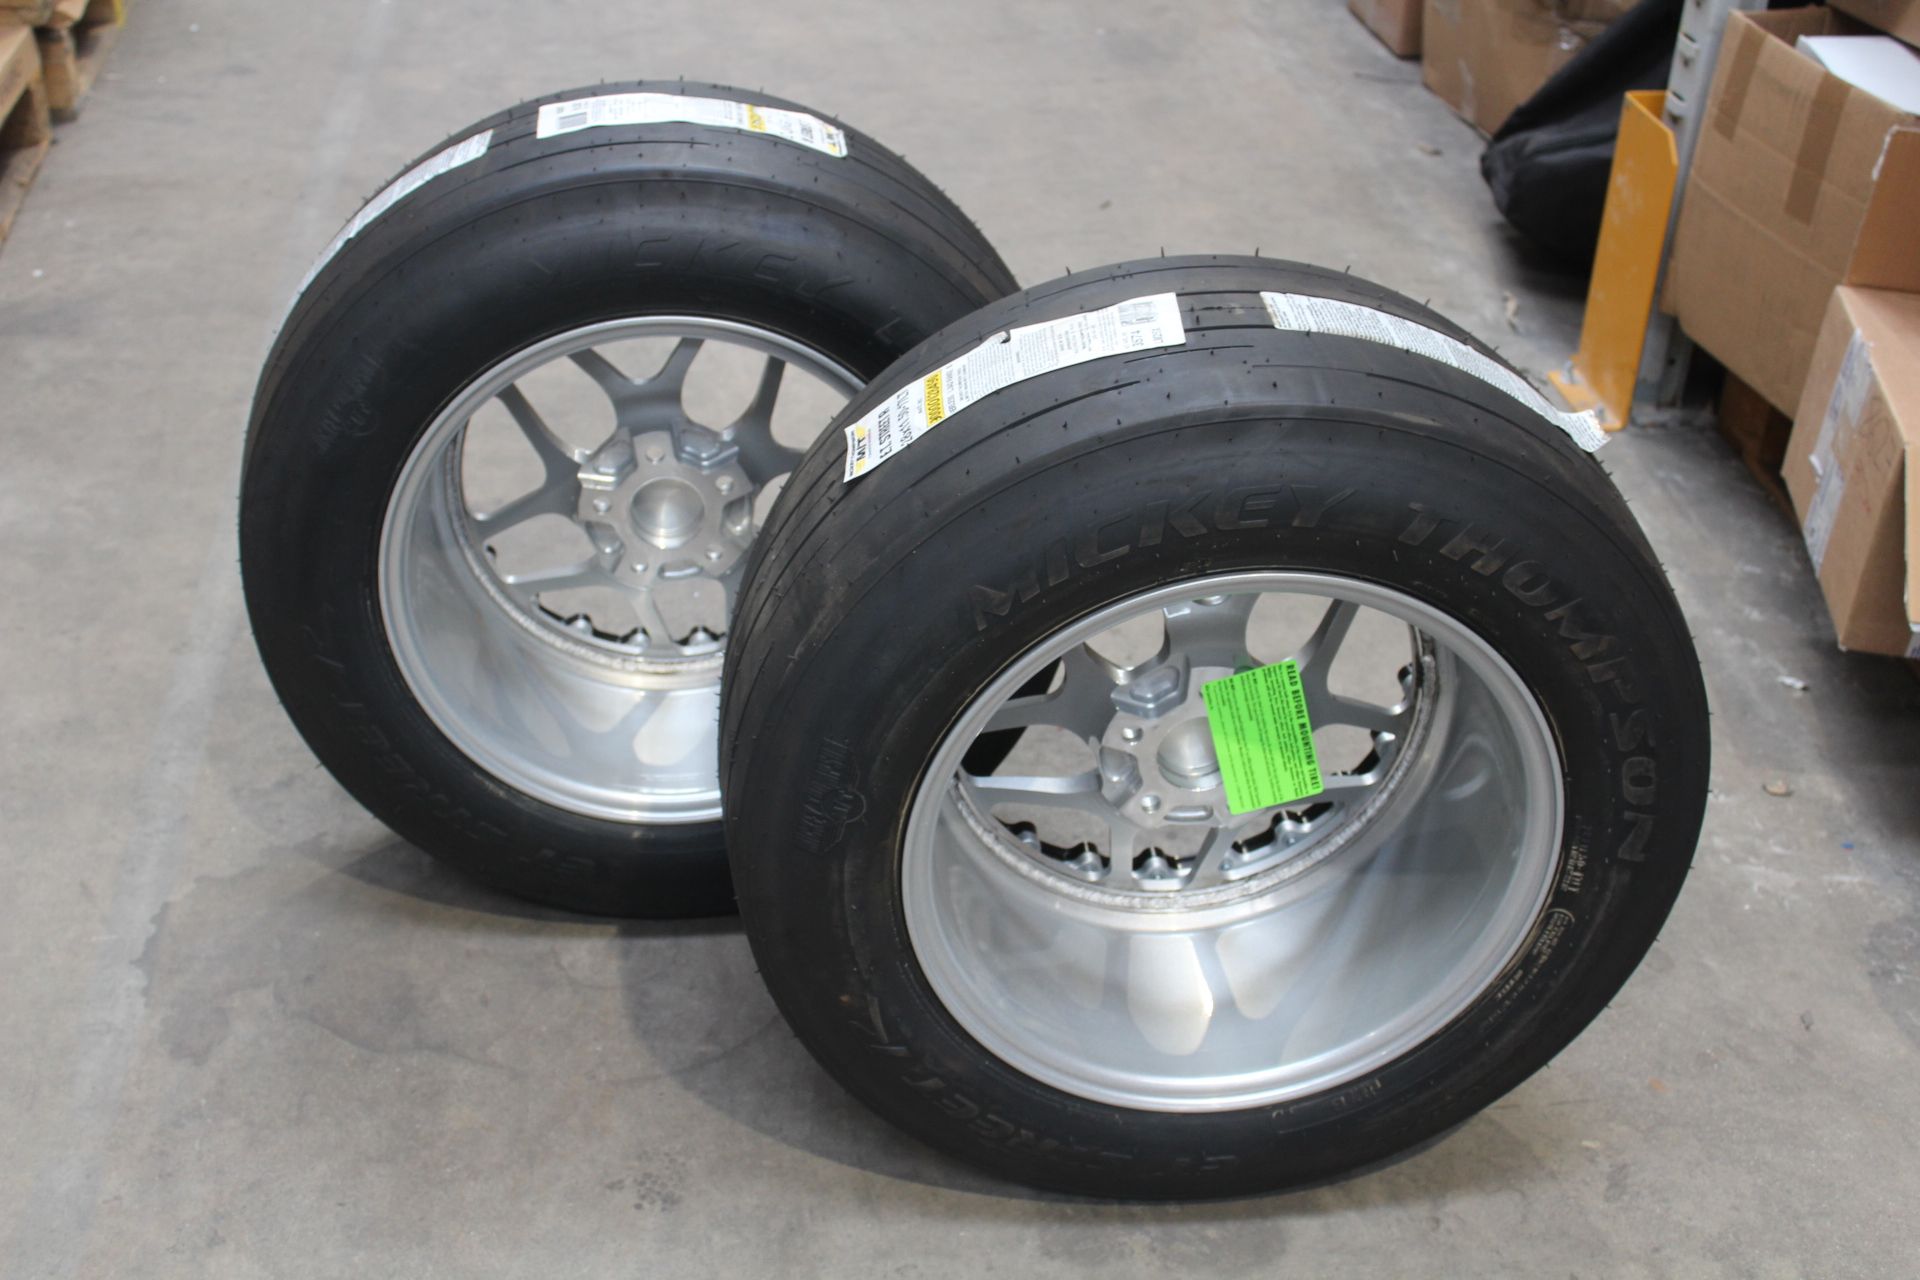 Two Cicio Performance Drag Wheels for a Nissan R35 GTR with Mickey Thompson E.T Street R Tyres. - Image 5 of 7